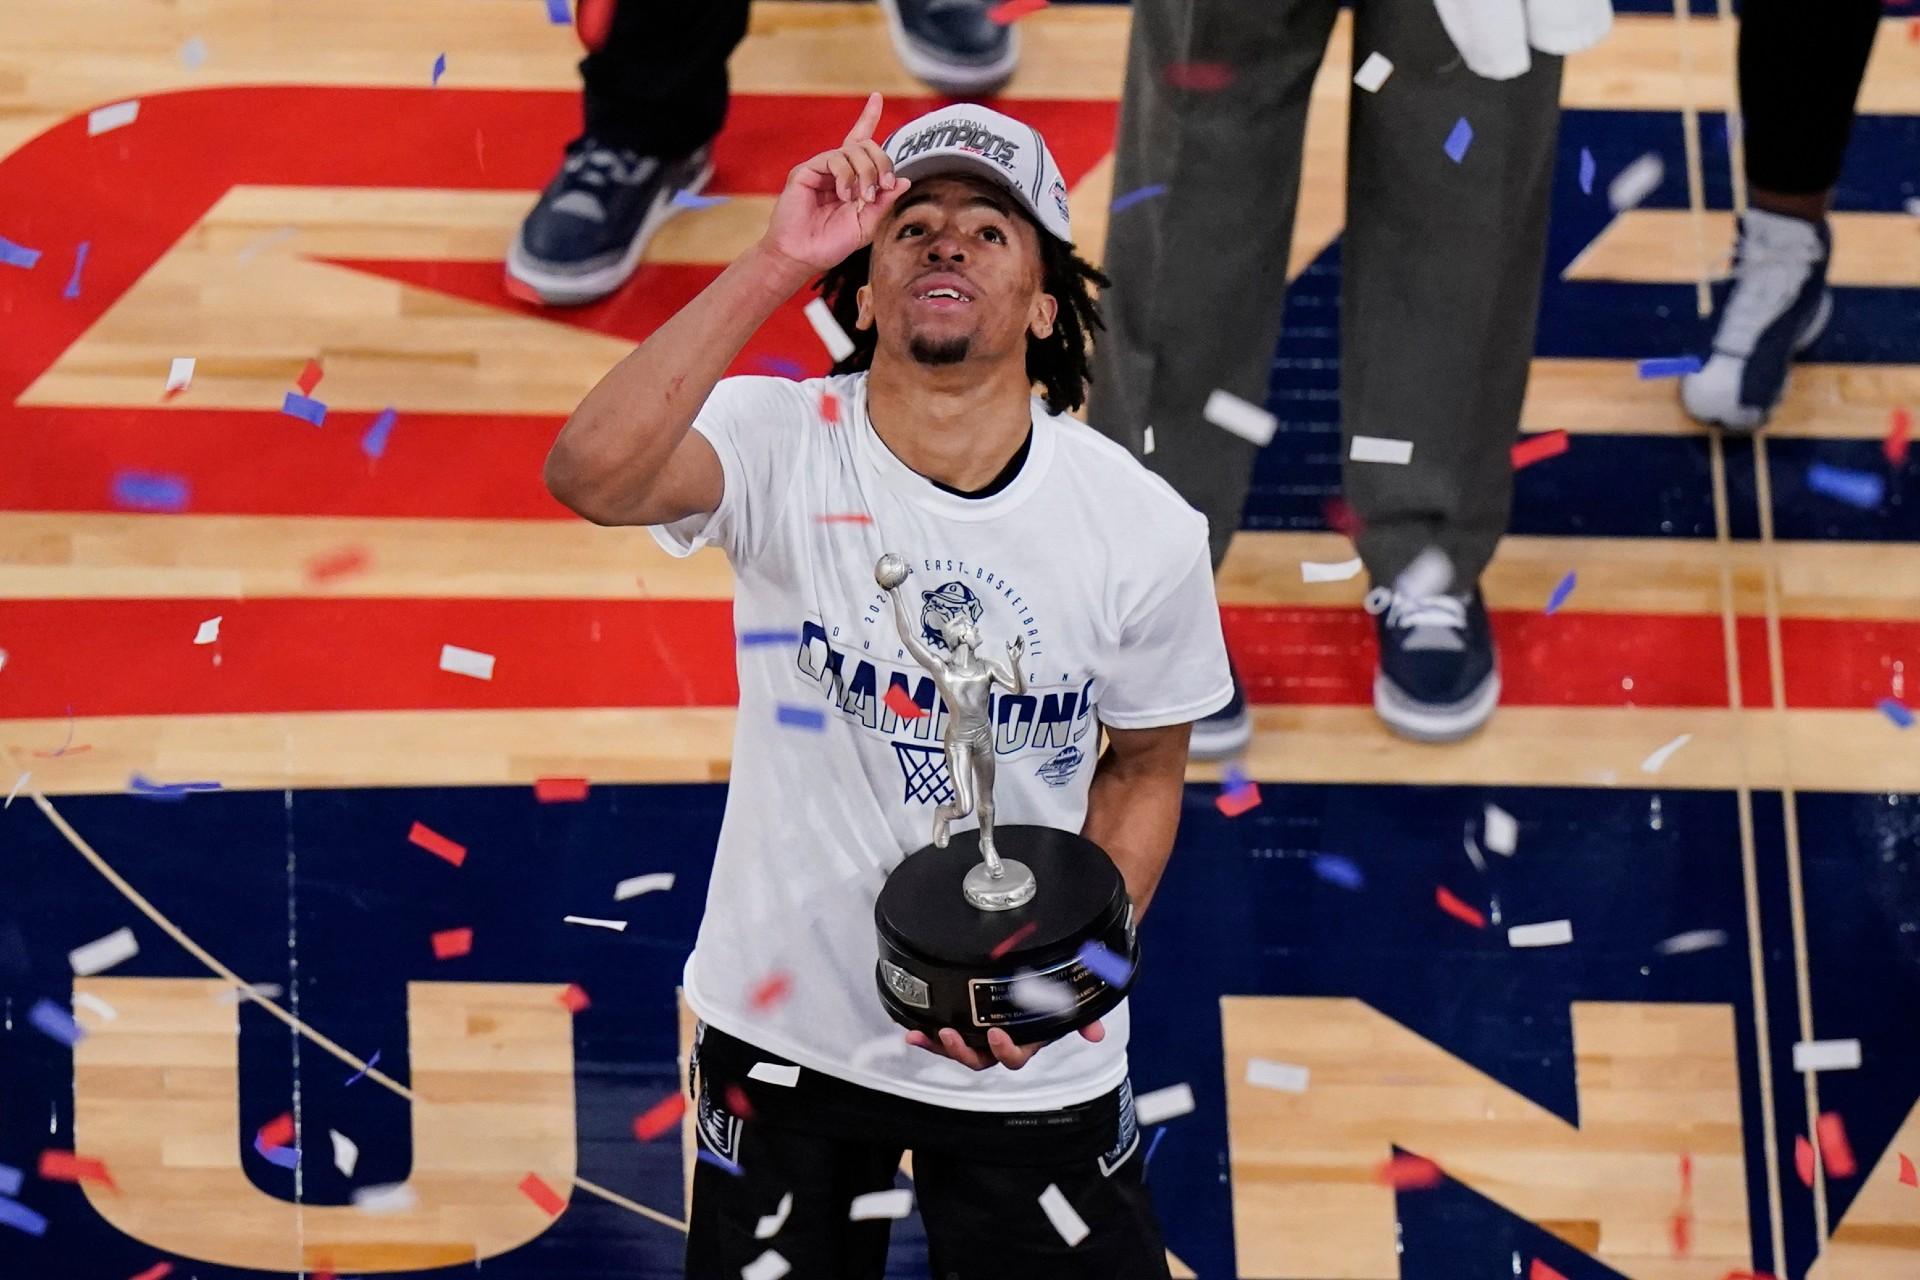 Georgetown’s Dante Harris celebrates while holding the Most Outstanding Player trophy after an NCAA college basketball game against Creighton in the championship of the Big East Conference tournament Saturday, March 13, 2021, in New York. (AP Photo / Frank Franklin II)